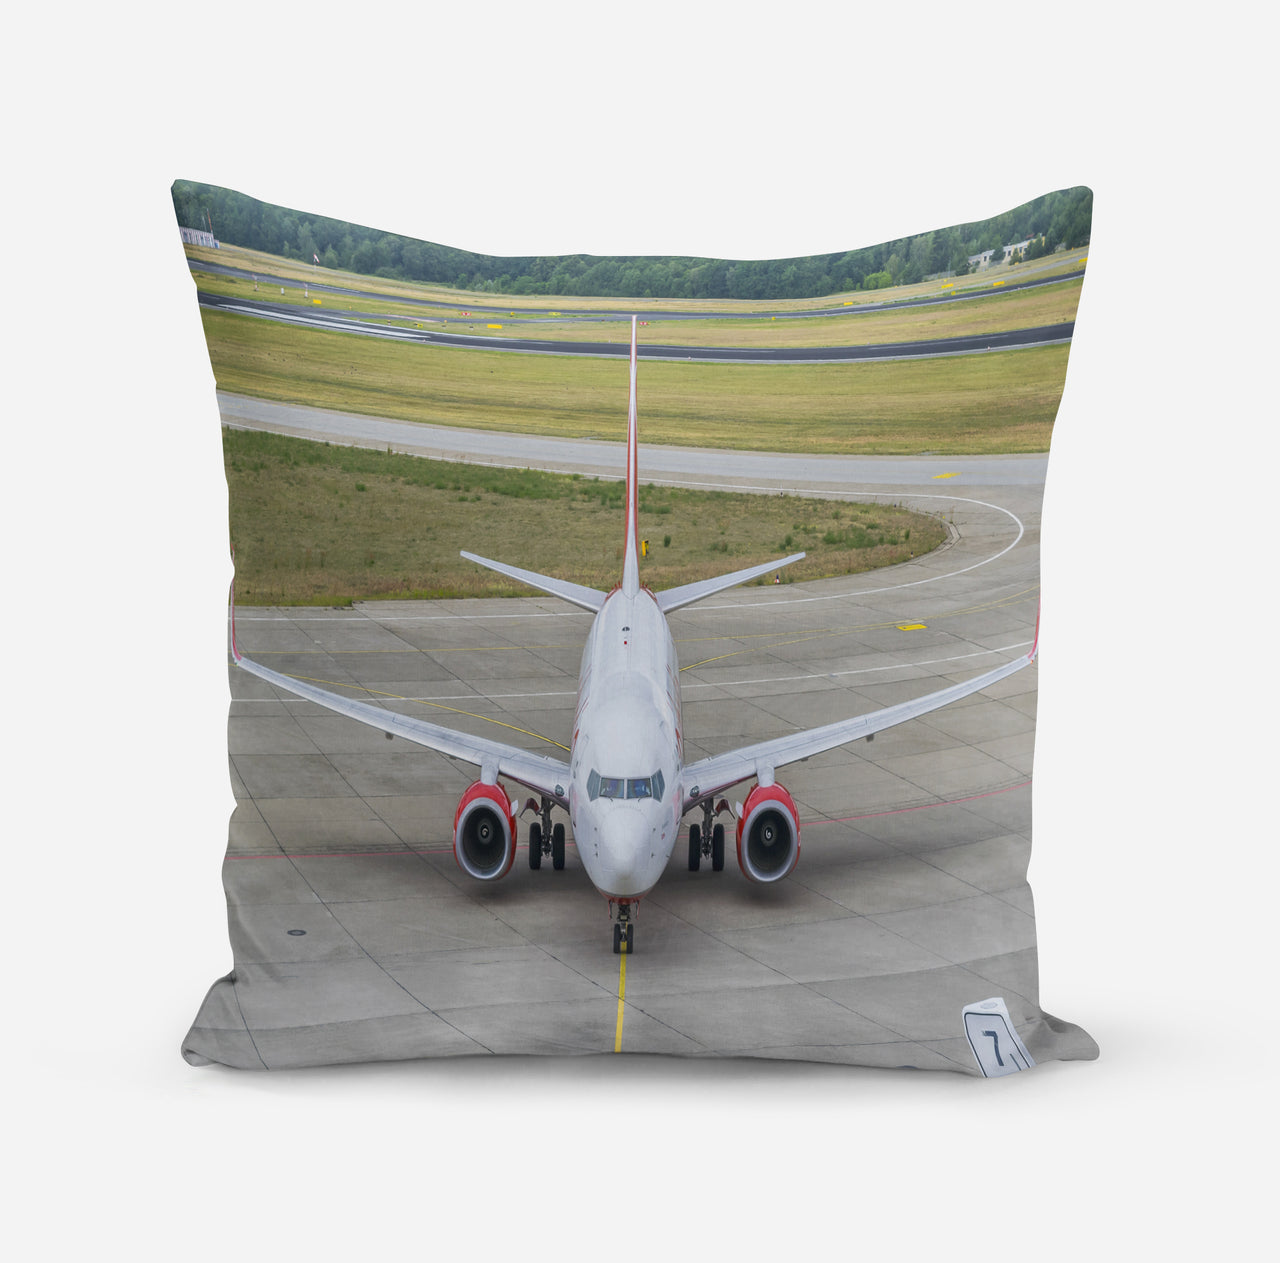 Face to Face with Boeing 737 Designed Pillows